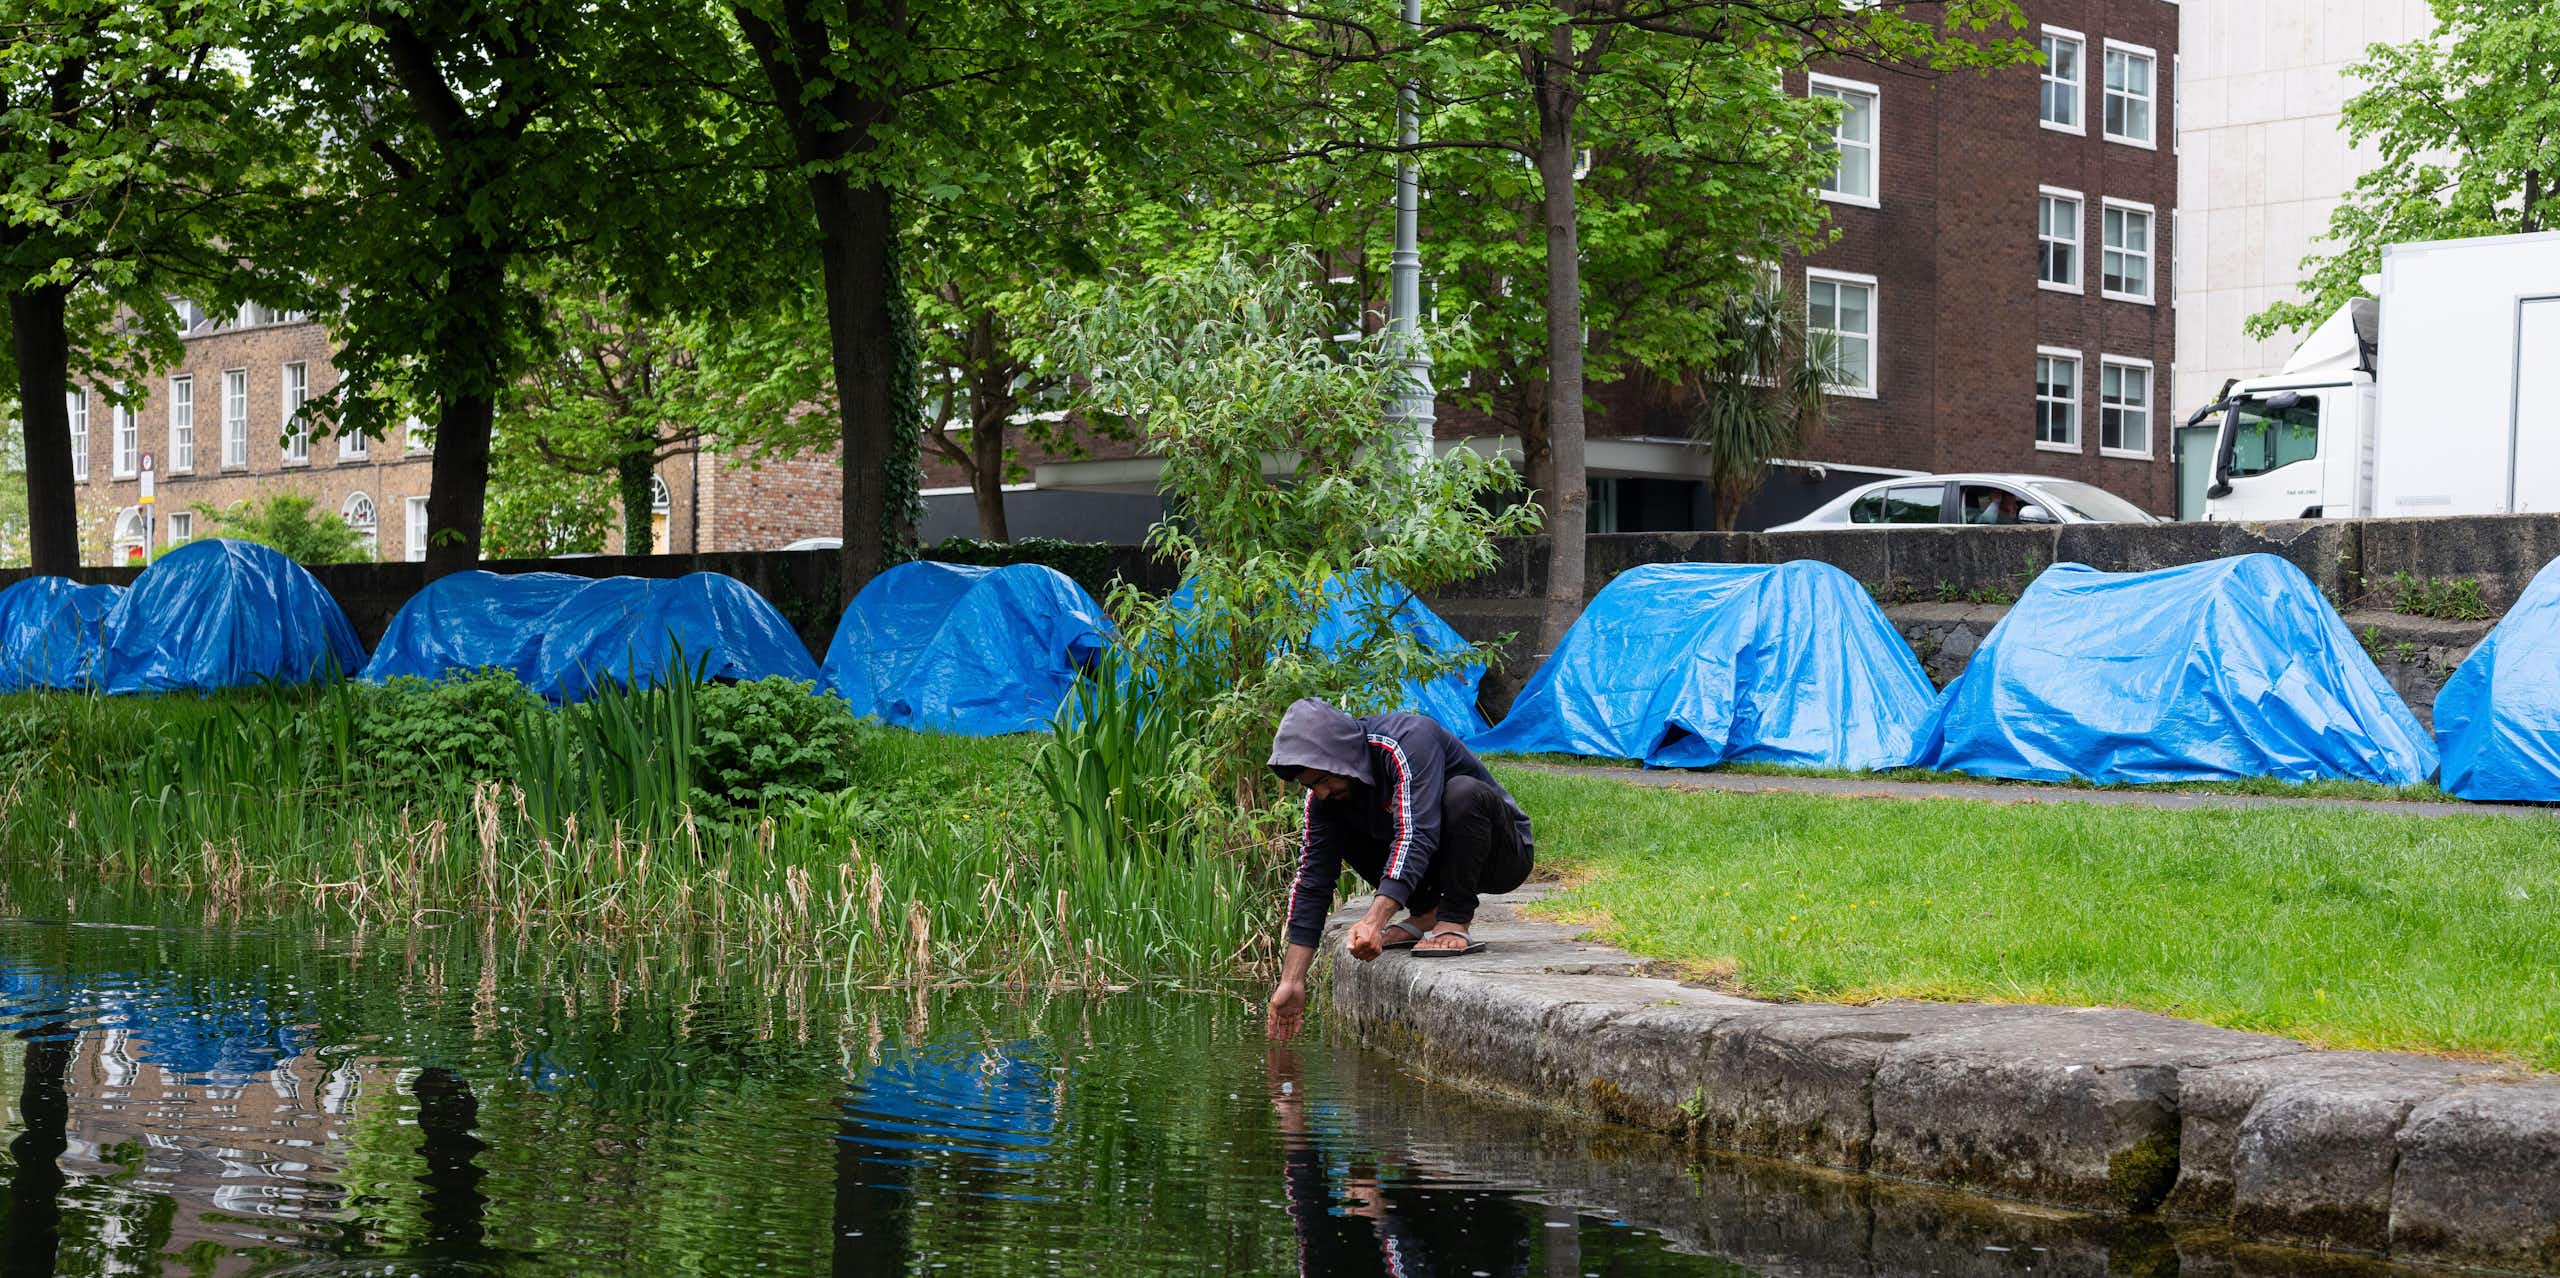 A man squats next to the Grand Canal in Dublin and washes his hands, while a row of blue tents is visible behind him on the canal bank